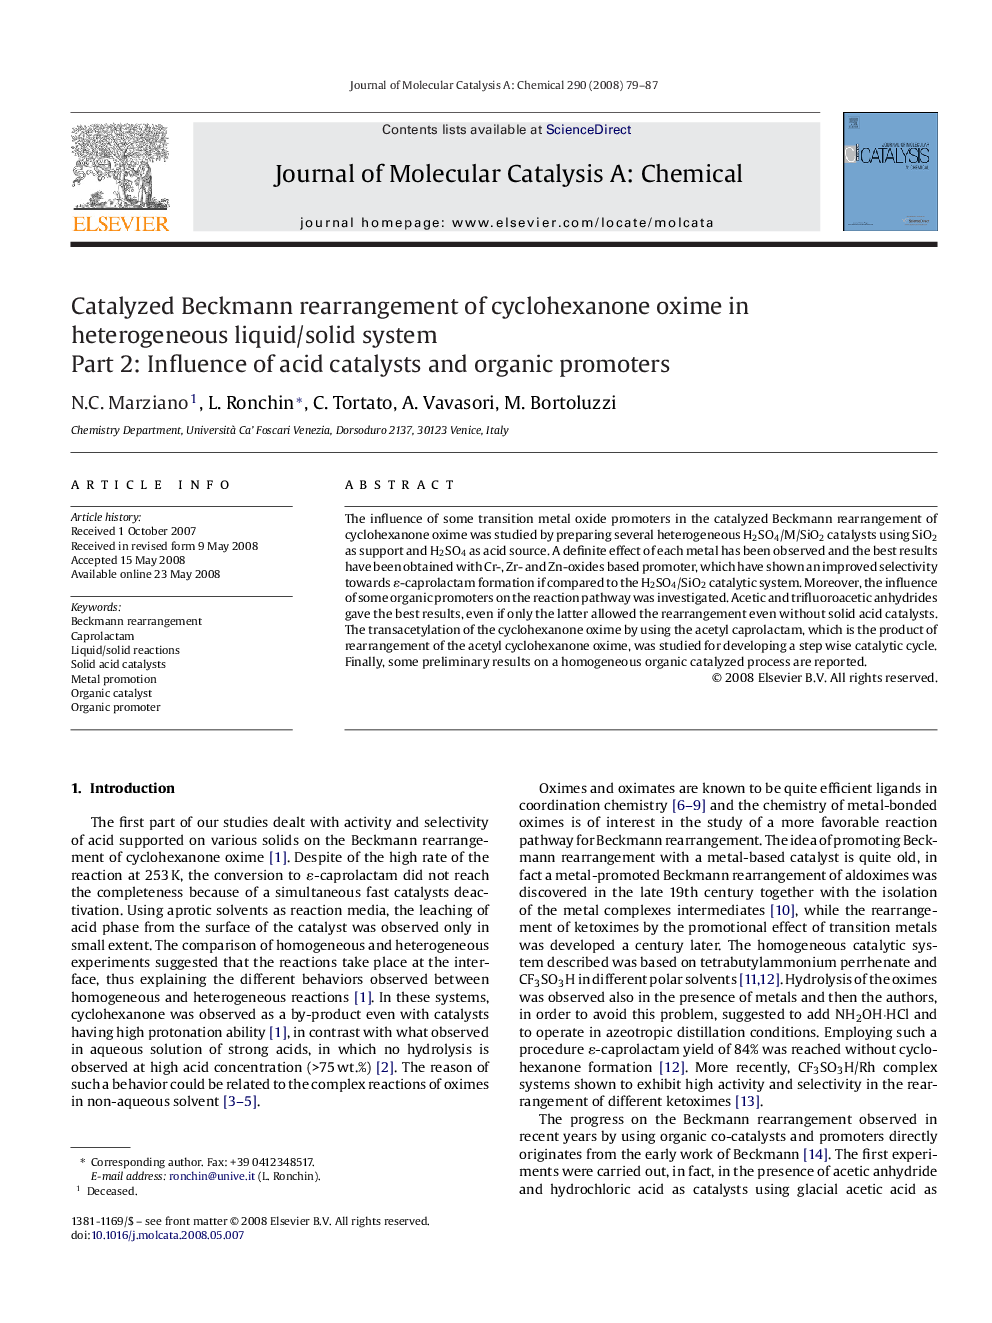 Catalyzed Beckmann rearrangement of cyclohexanone oxime in heterogeneous liquid/solid system: Part 2: Influence of acid catalysts and organic promoters